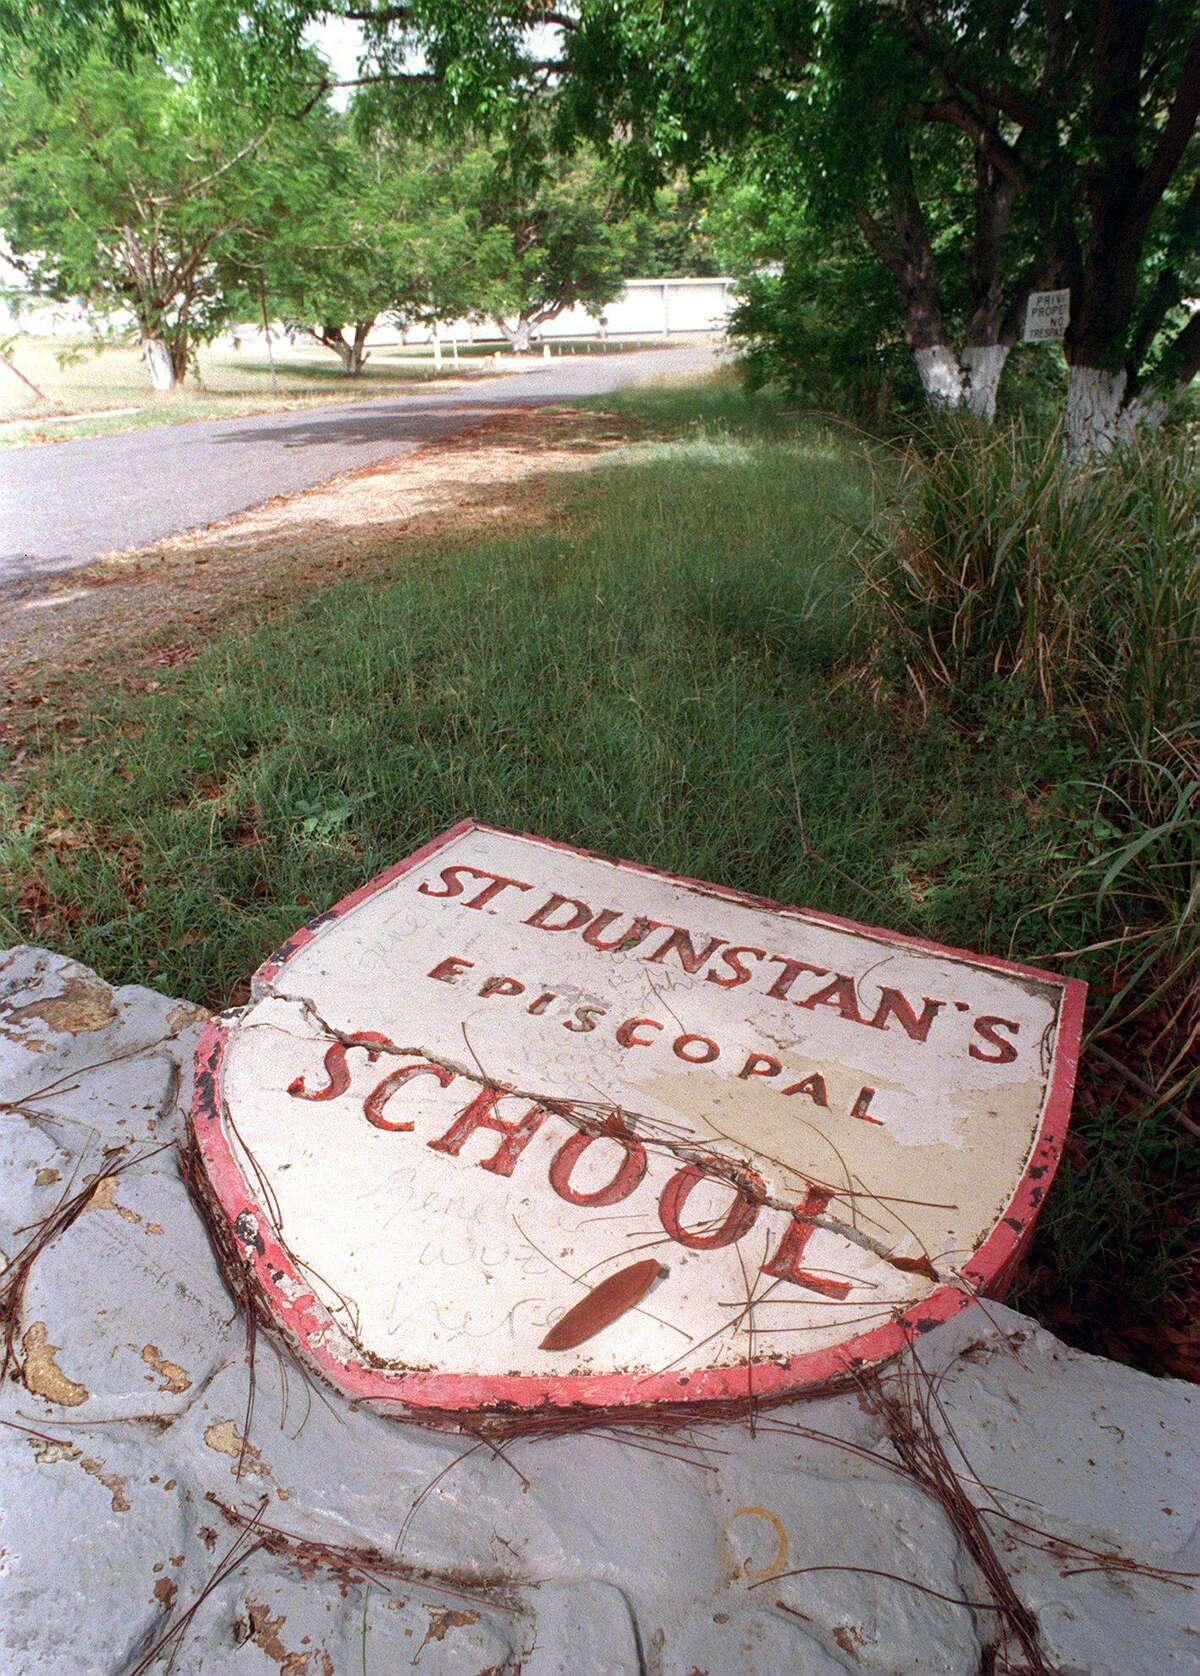 sports advance - St. Dunstan's Episcopal School, where Tim Duncan went to school in St. Croix. The school is no longer operating.